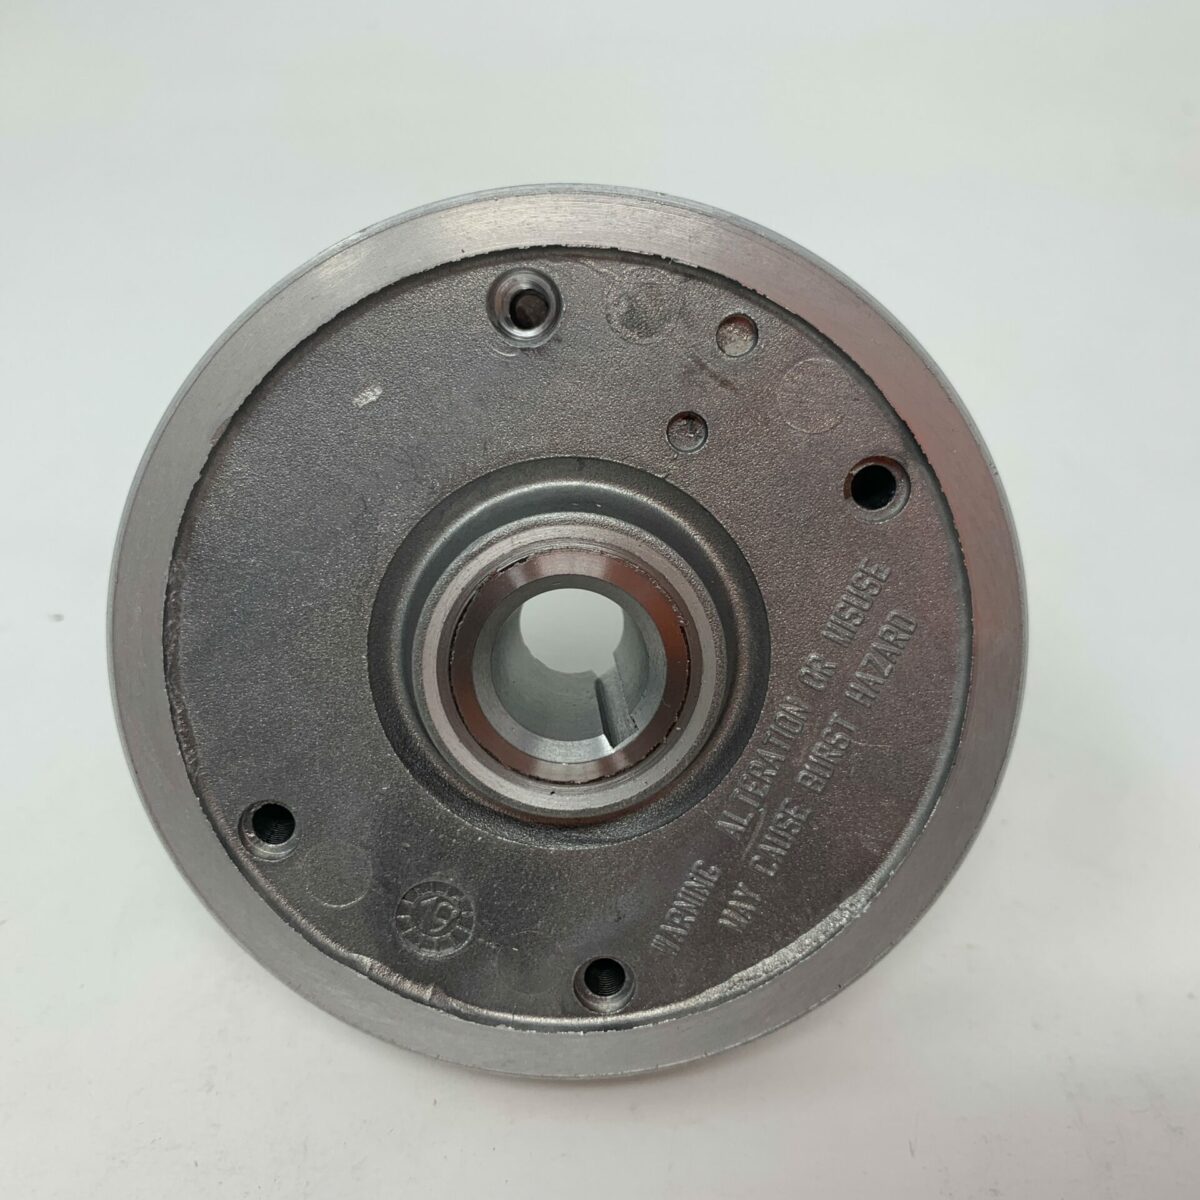 Moster 185 Flywheel Assembly